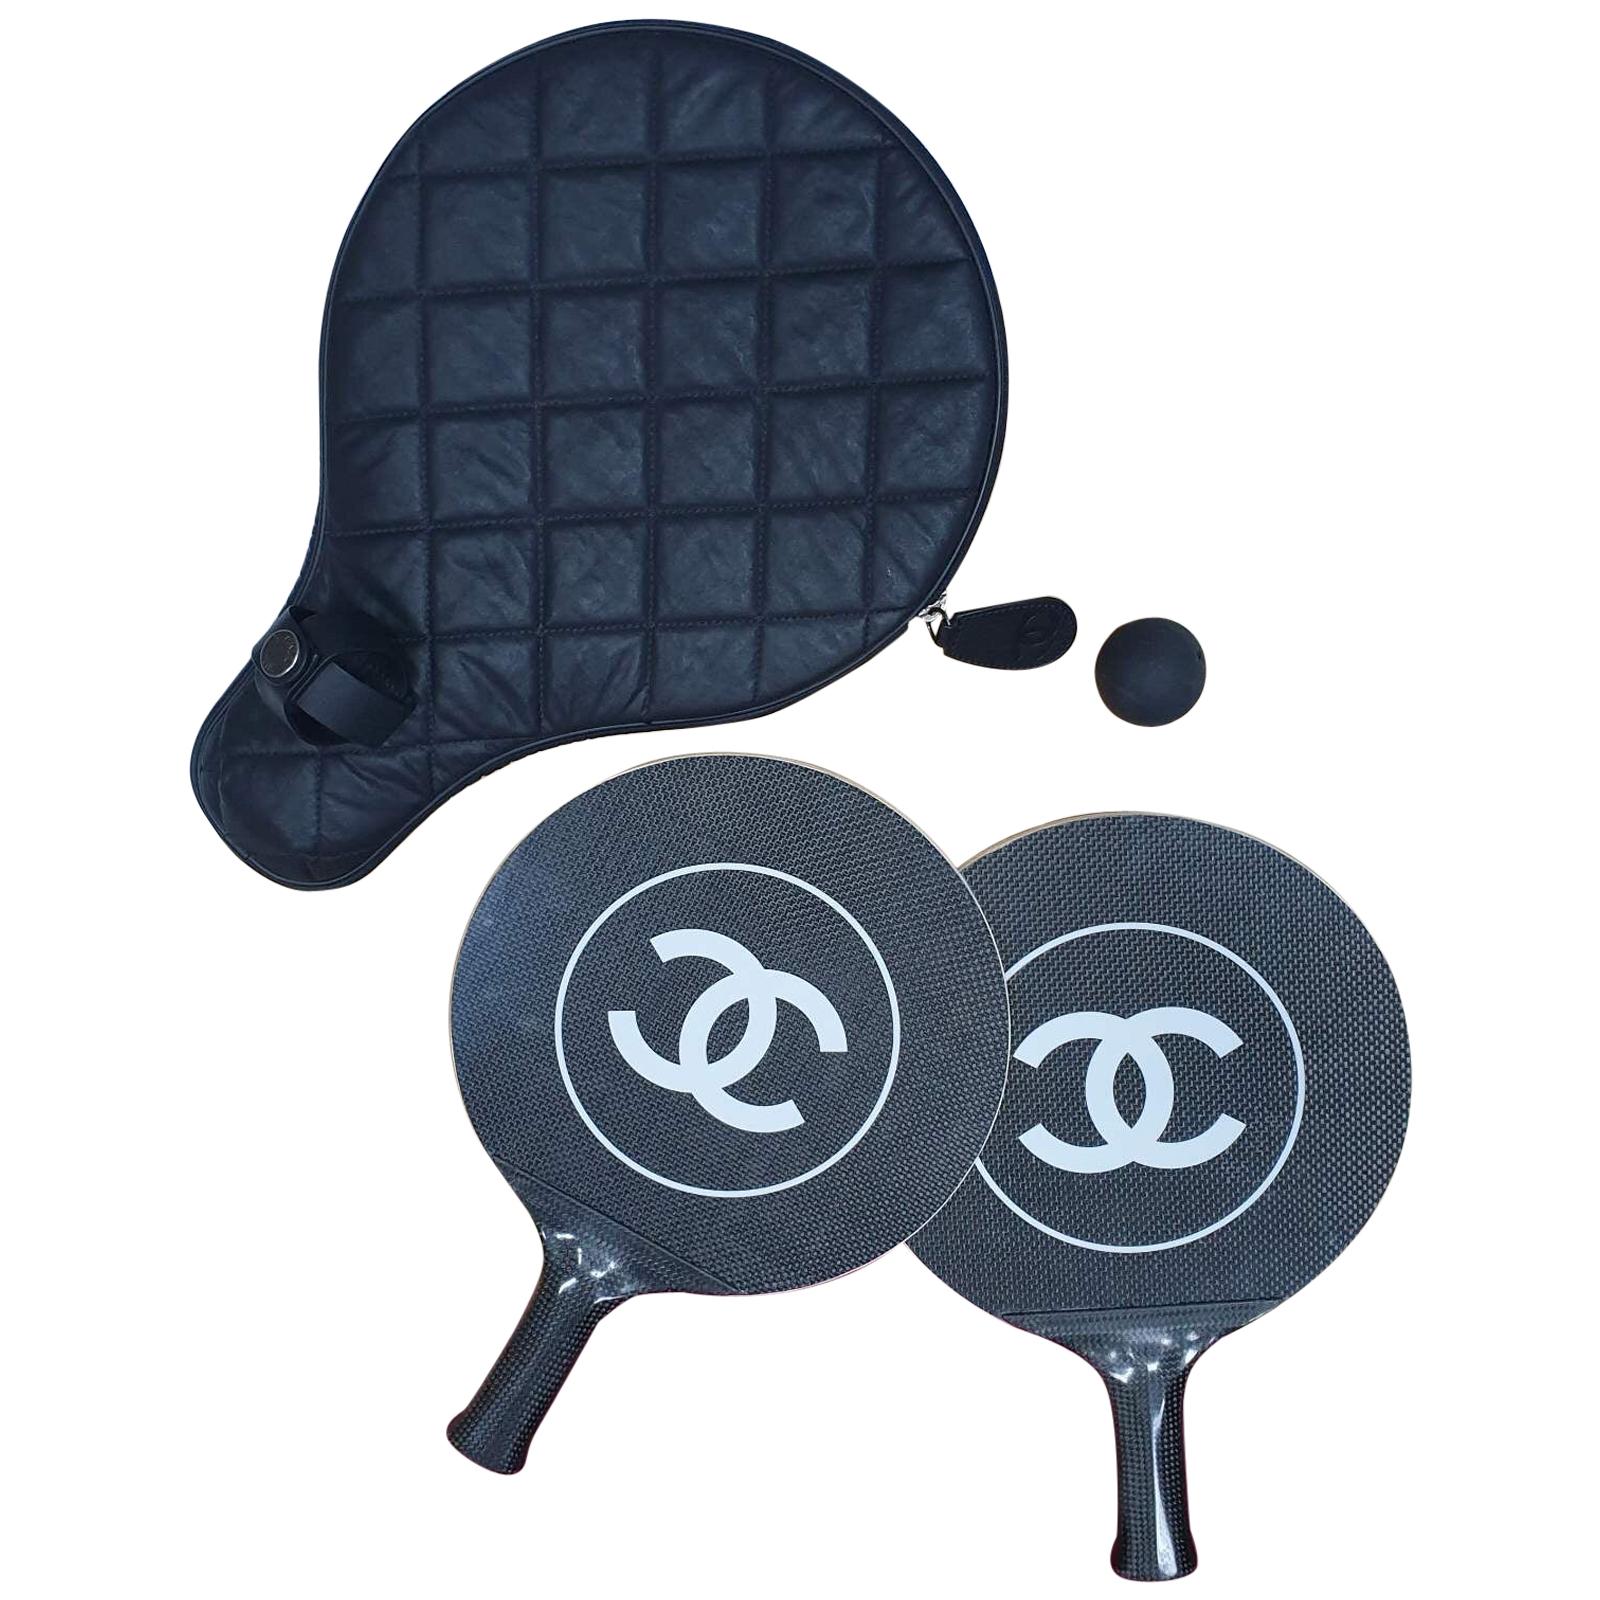 Chanel Tennis Ping Pong Carbon Fiber Paddles Racket set with rubber ball.